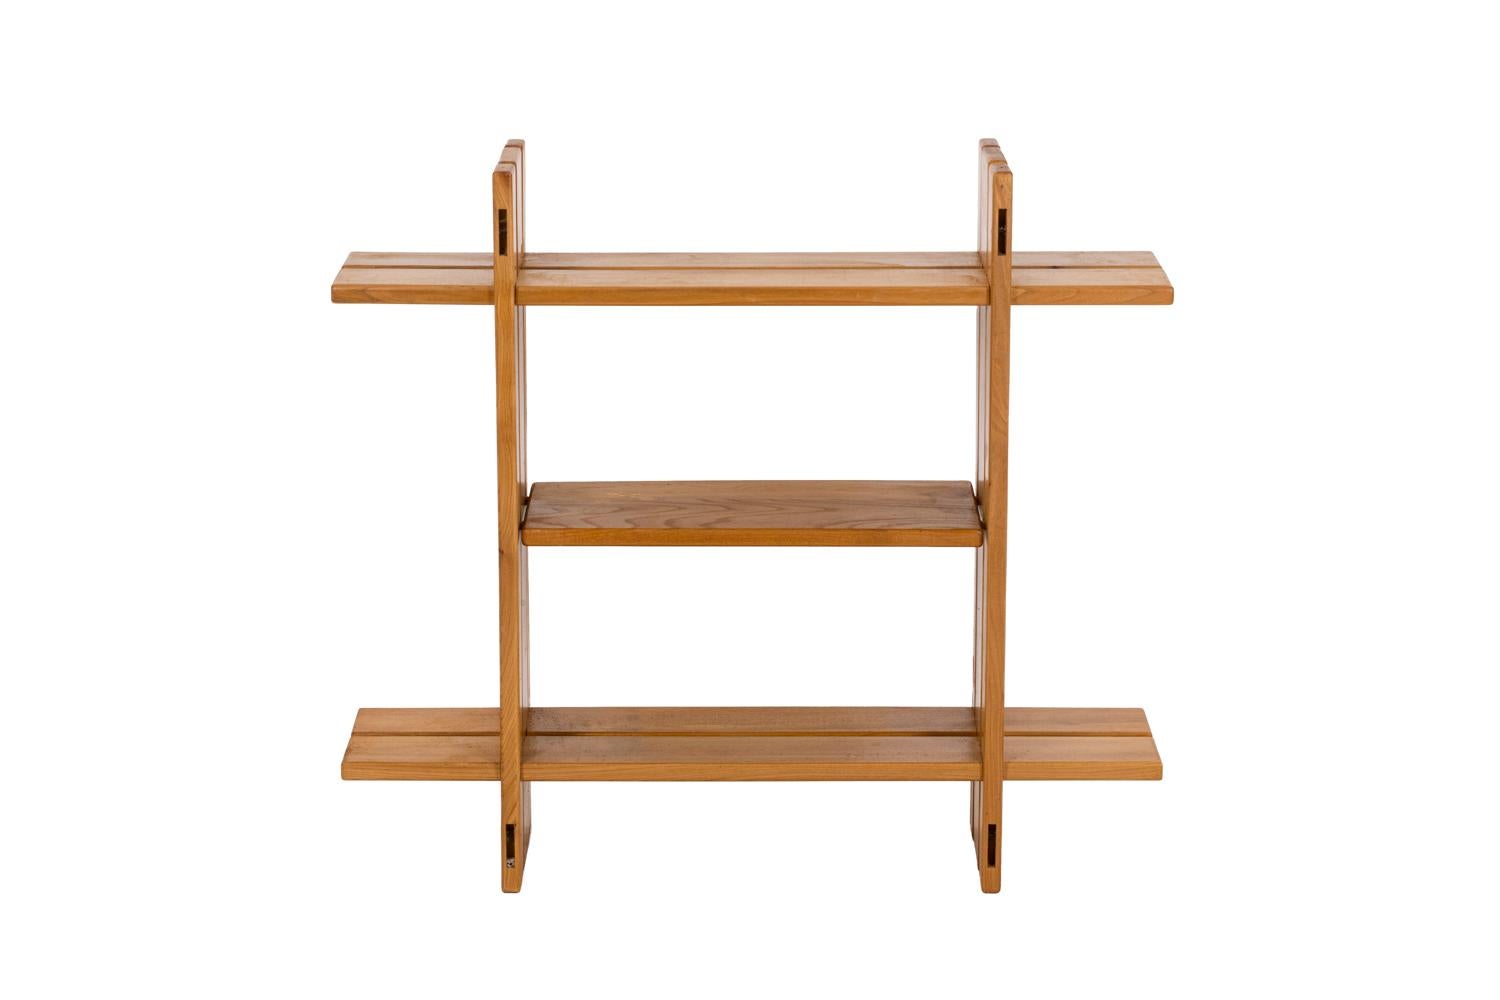 Maison Regain, attributed to.

Series of five square-shaped shelves formed by four assembled boards. A fifth removable board disposed in the center lets modify the height of the shelf. 

French work realized in the 1960s.
  